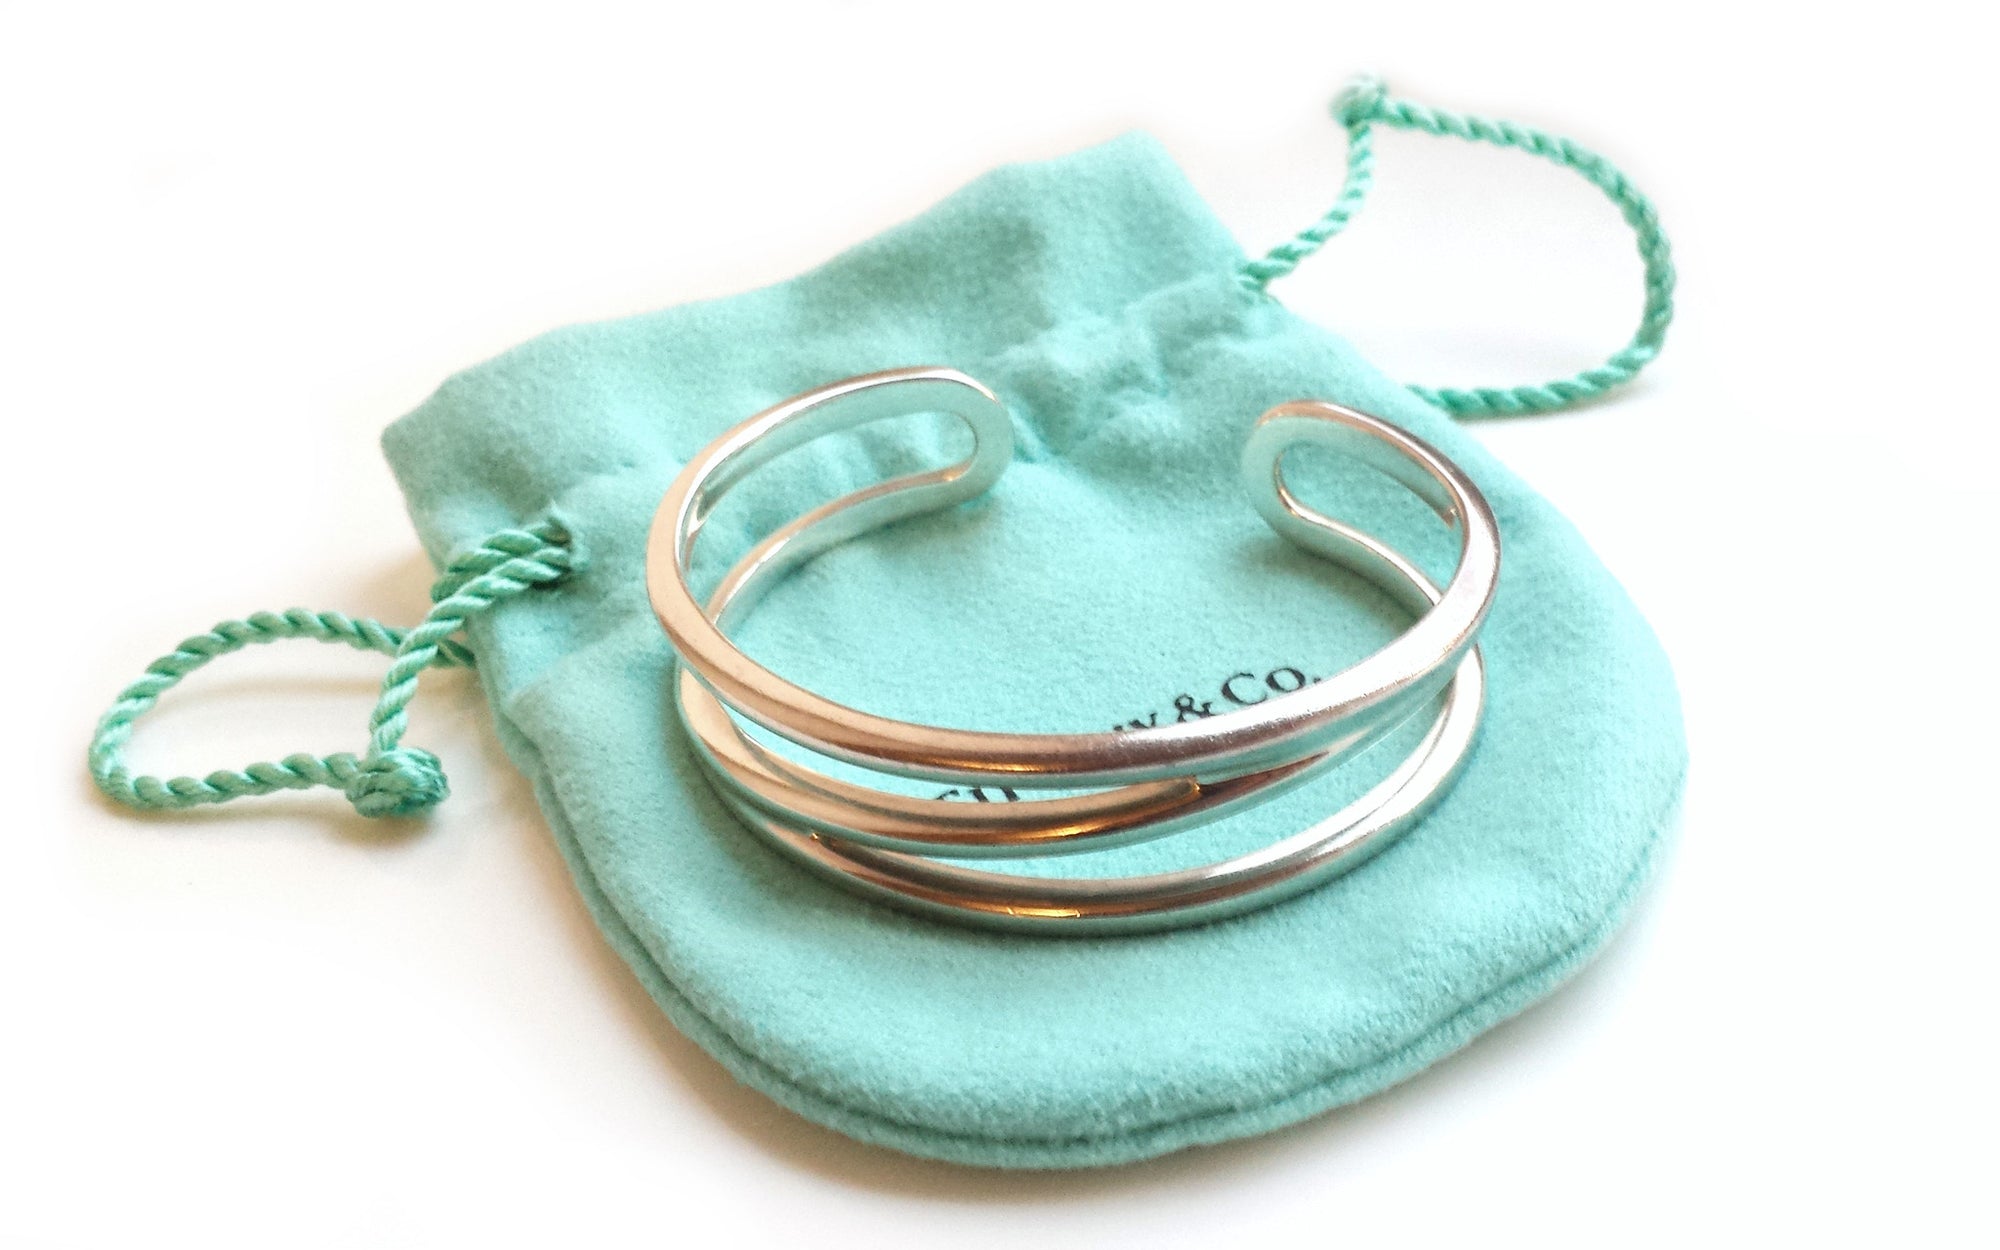 Tiffany & Co. Zig Zag Bracelet Sterling Silver – Small with Pouch